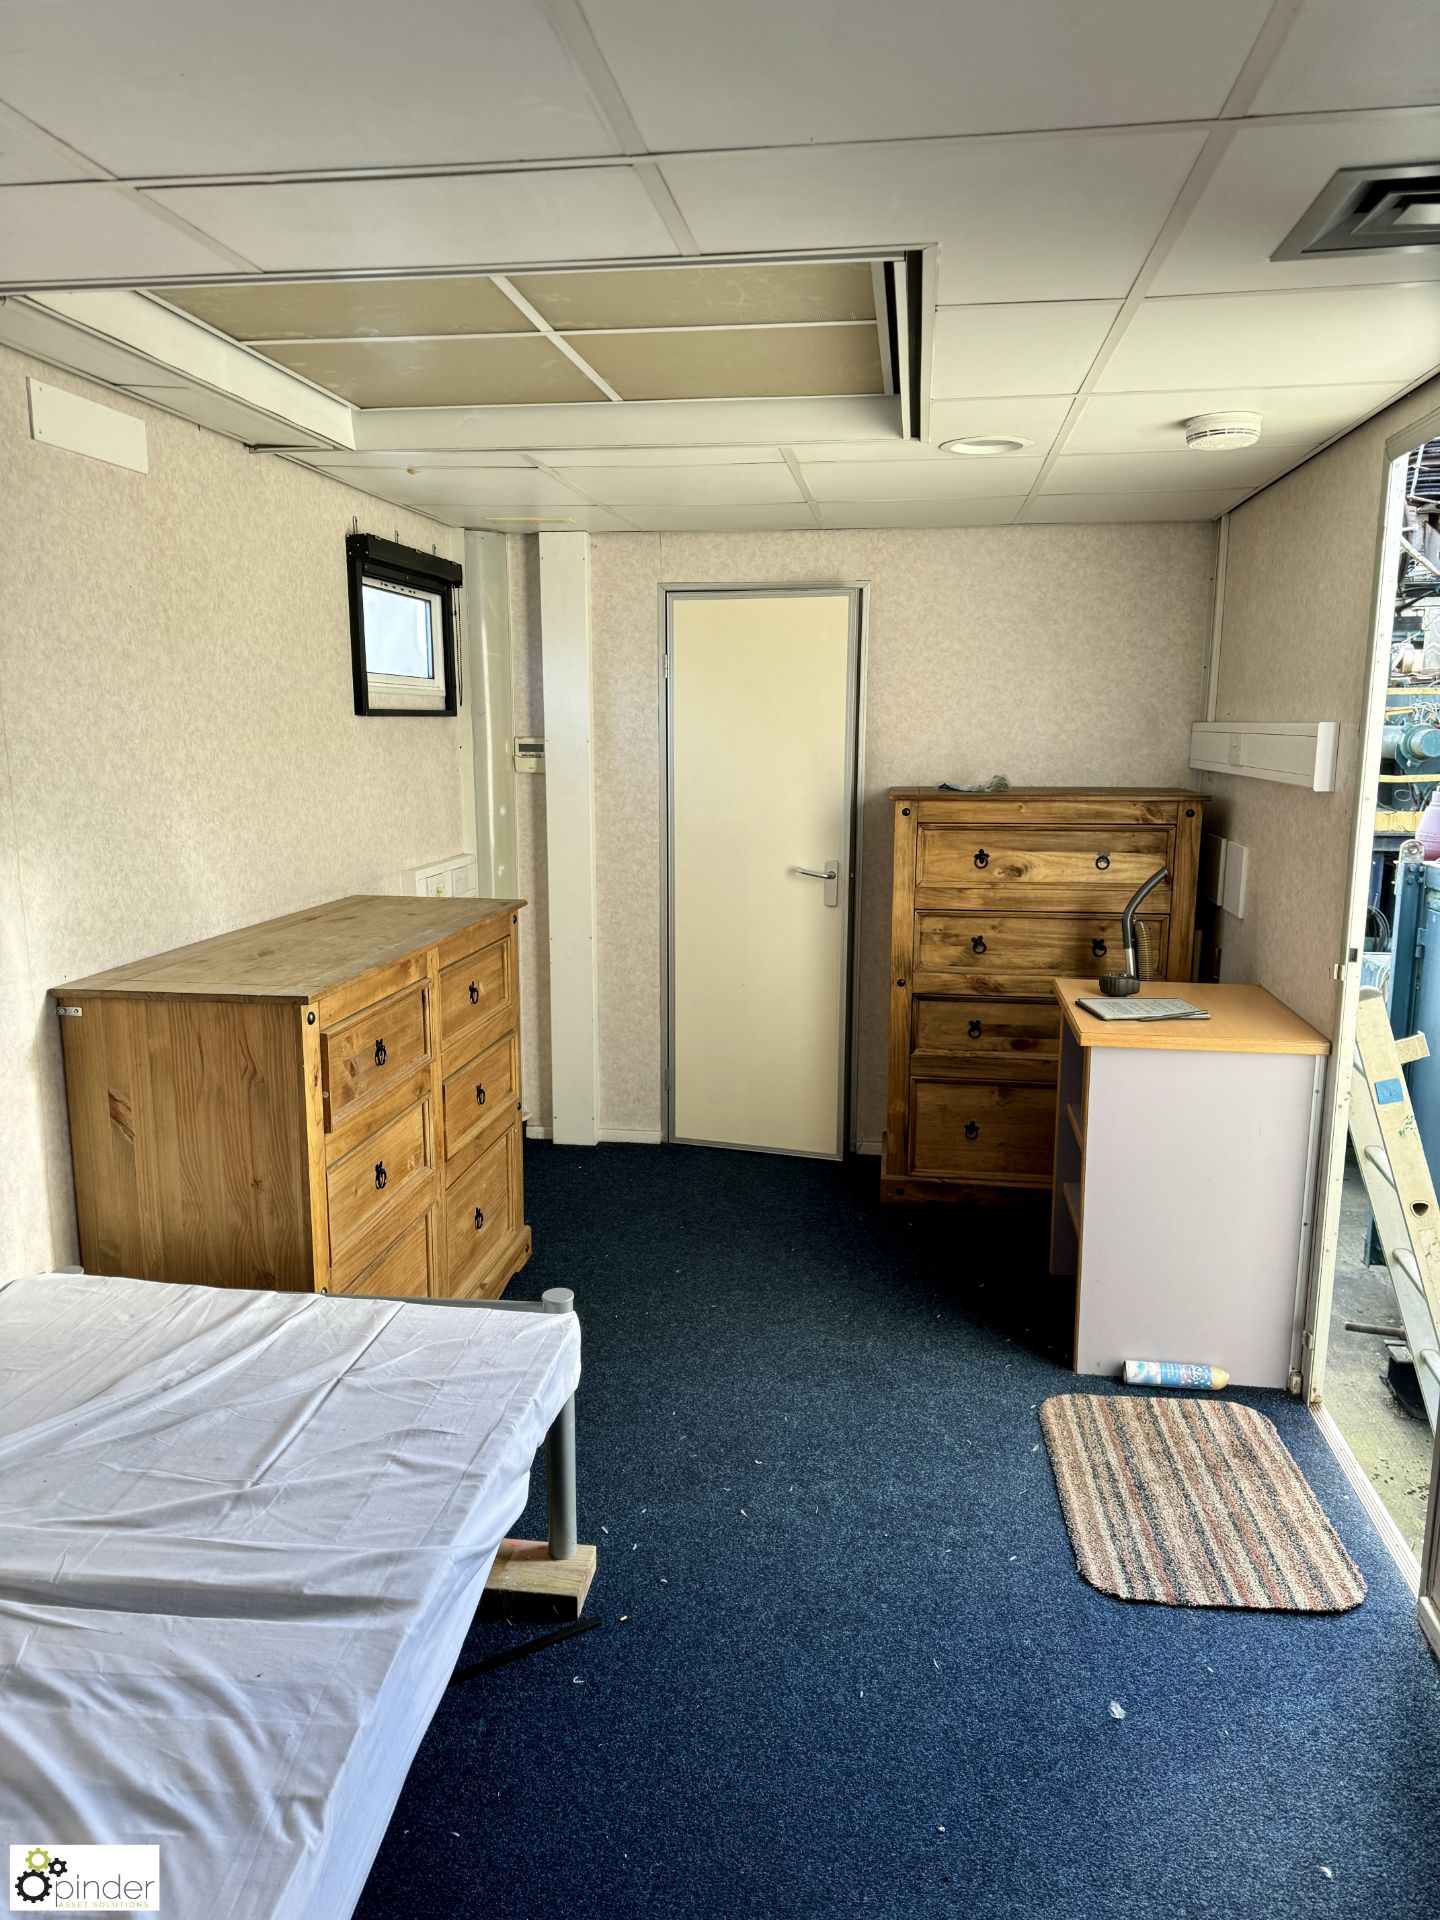 Trailer type Accommodation Unit, comprising office 3000mm x 2450mm, with window door, plug points, - Image 26 of 33